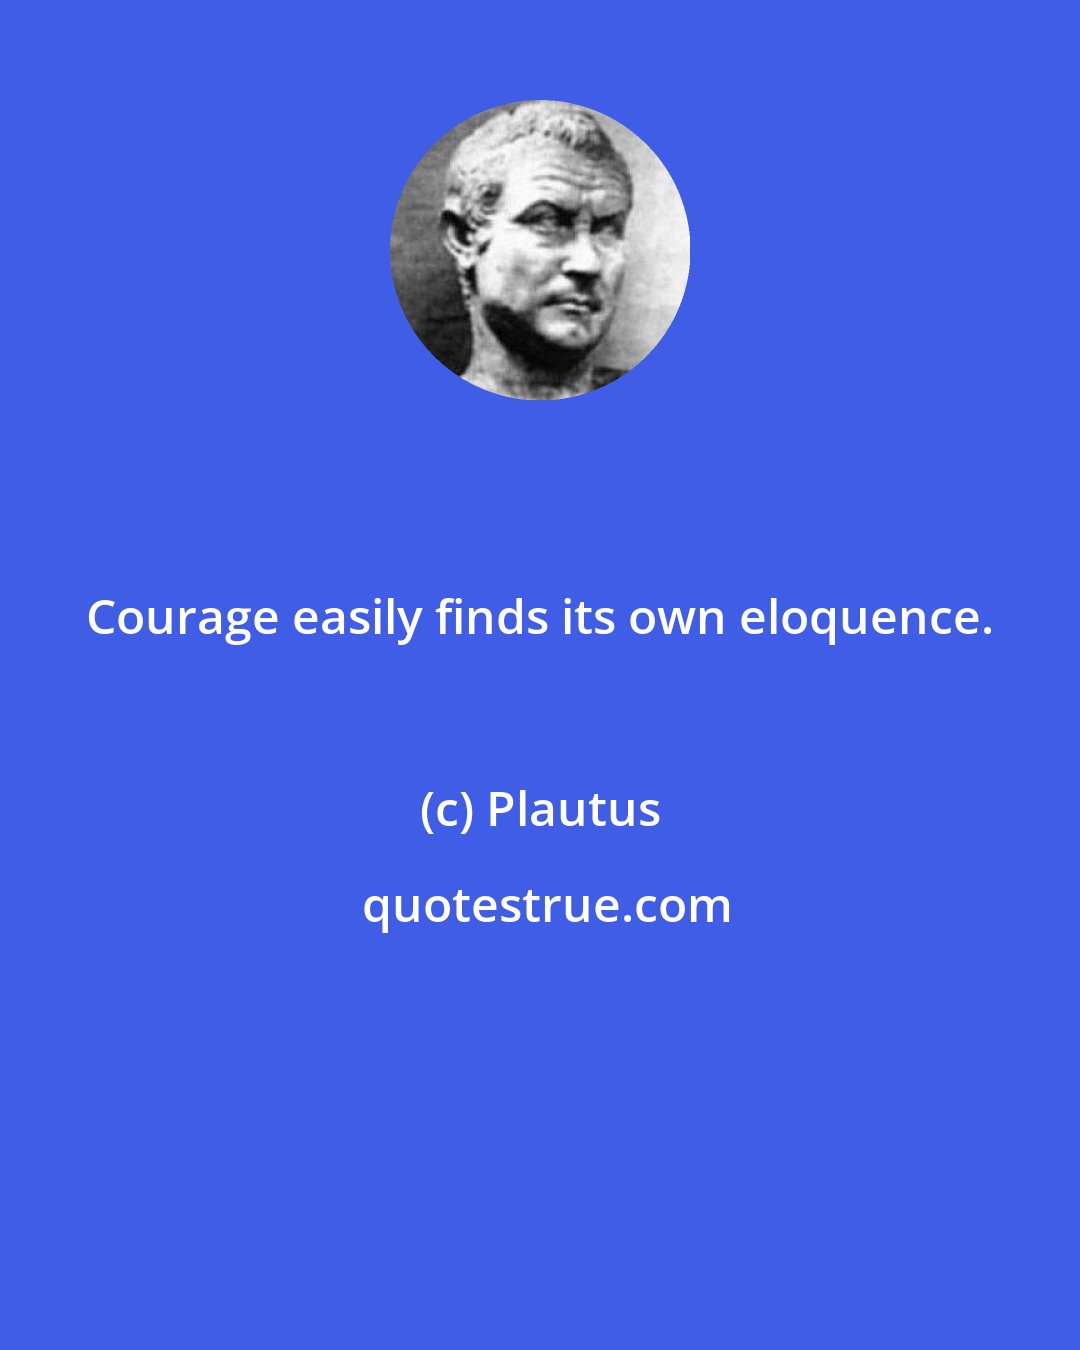 Plautus: Courage easily finds its own eloquence.